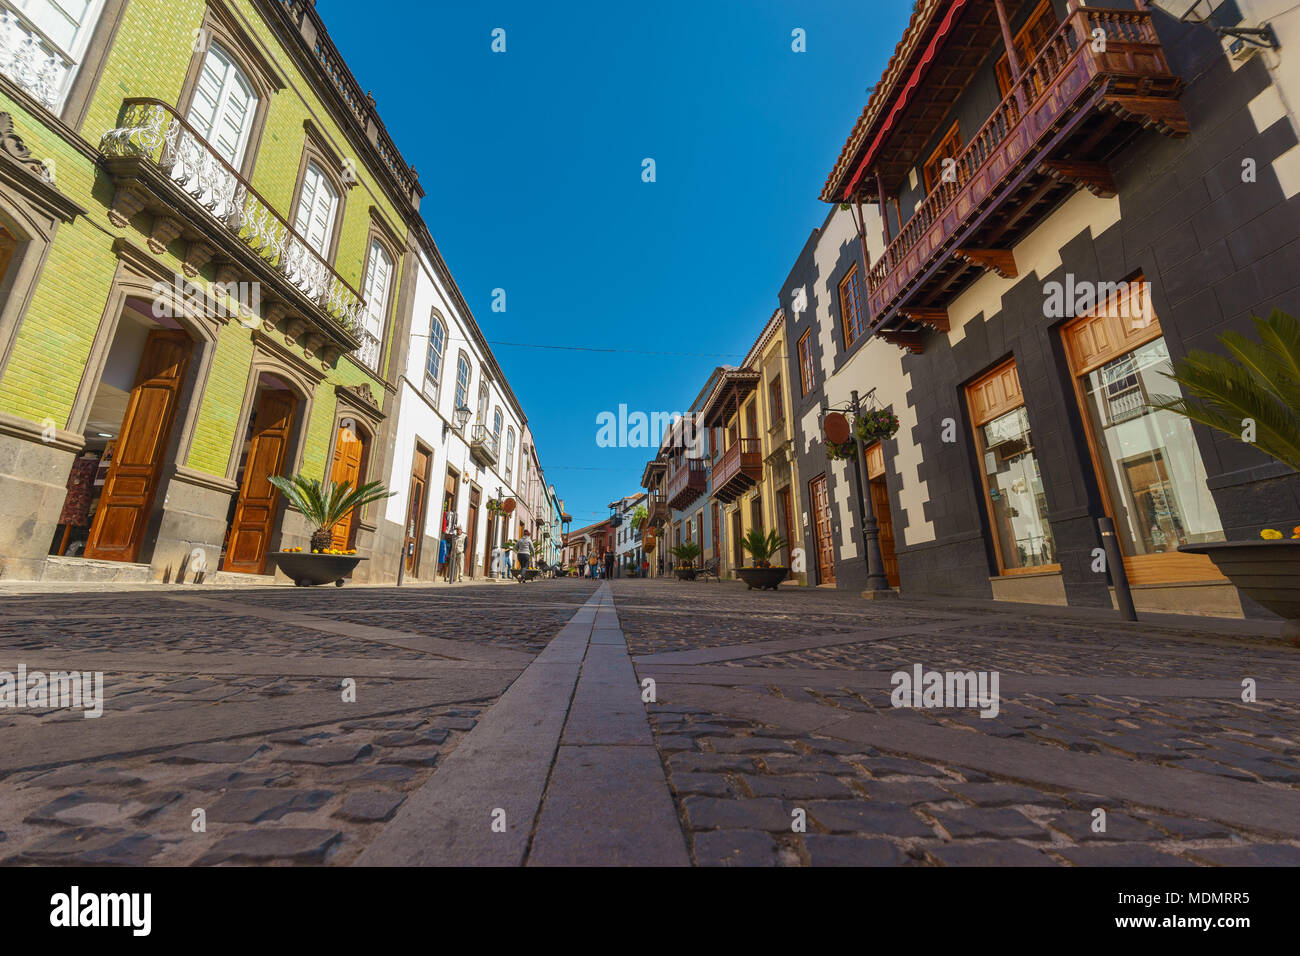 Teror, Spain - February 27, 2018: Calle Real de la Plaza, main pedestrian street with traditional canarian architecture and colorful facades. Stock Photo